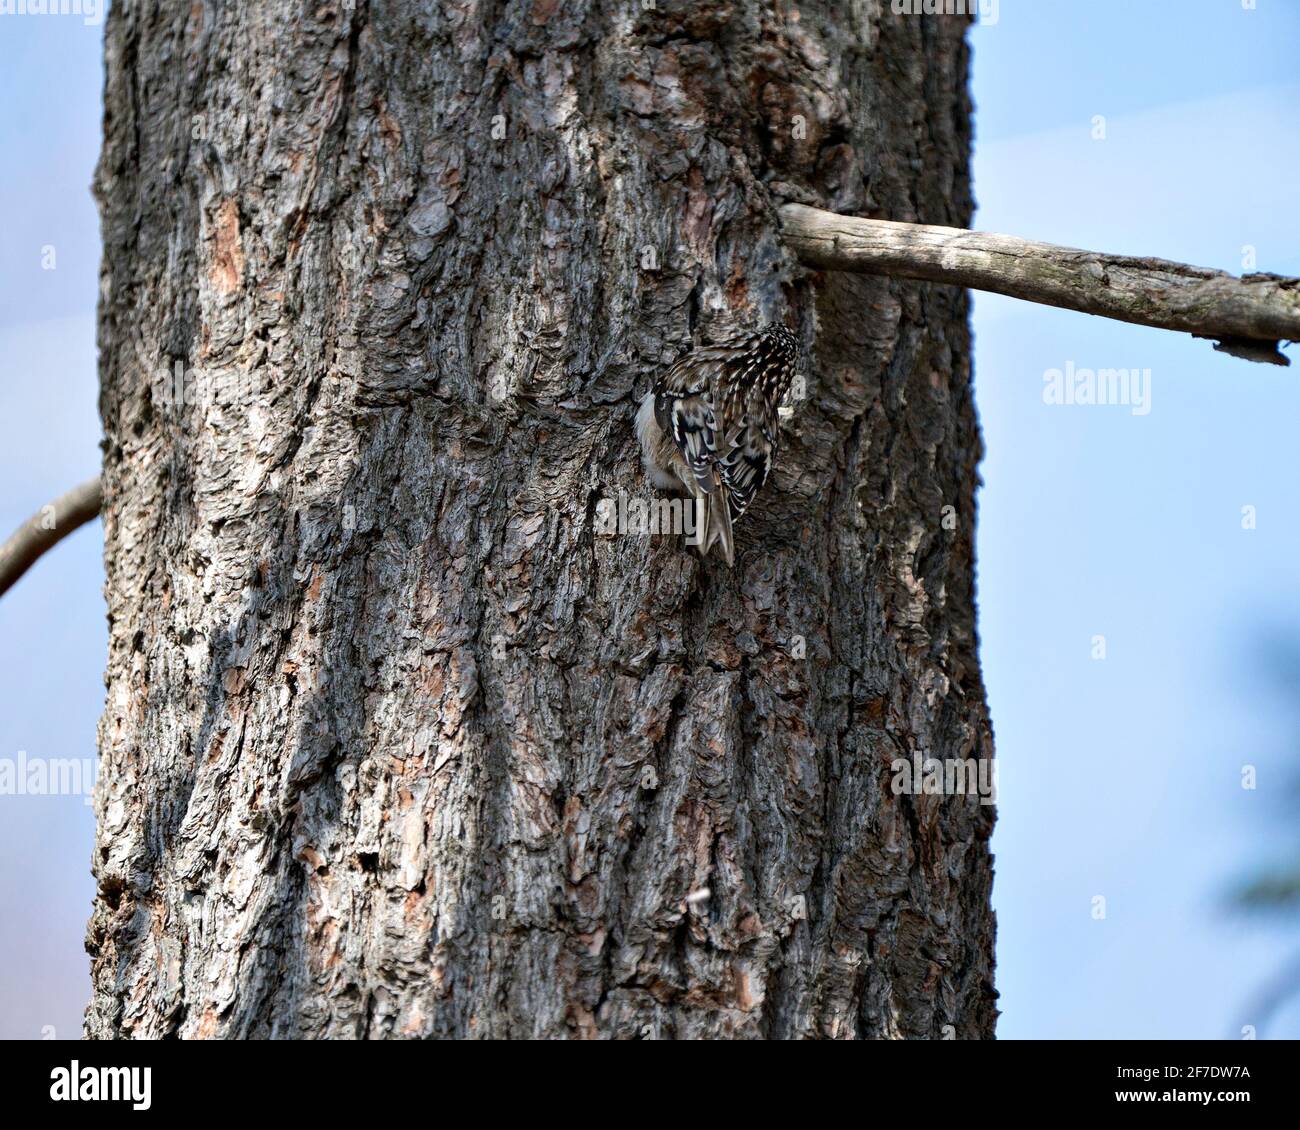 Bird Camouflage, find me on the tree trunk  in my environment and habitat and displaying brown camouflage feathers. Image. Picture. Portrait. Photo. Stock Photo